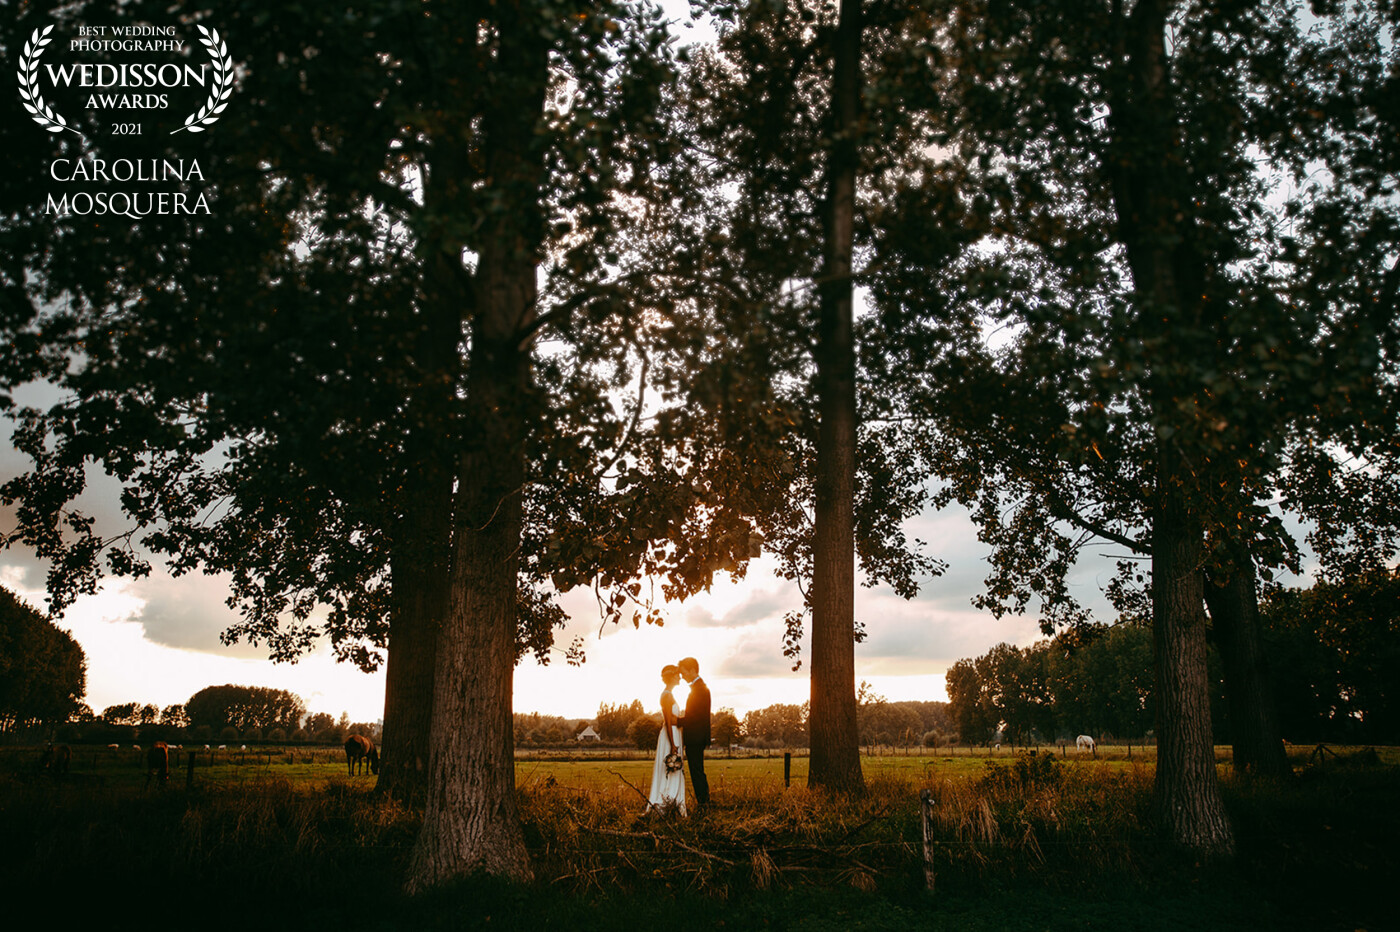 We love golden hours... Every time we have a wedding, we as photographers are waiting for the perfect light. This location was perfect